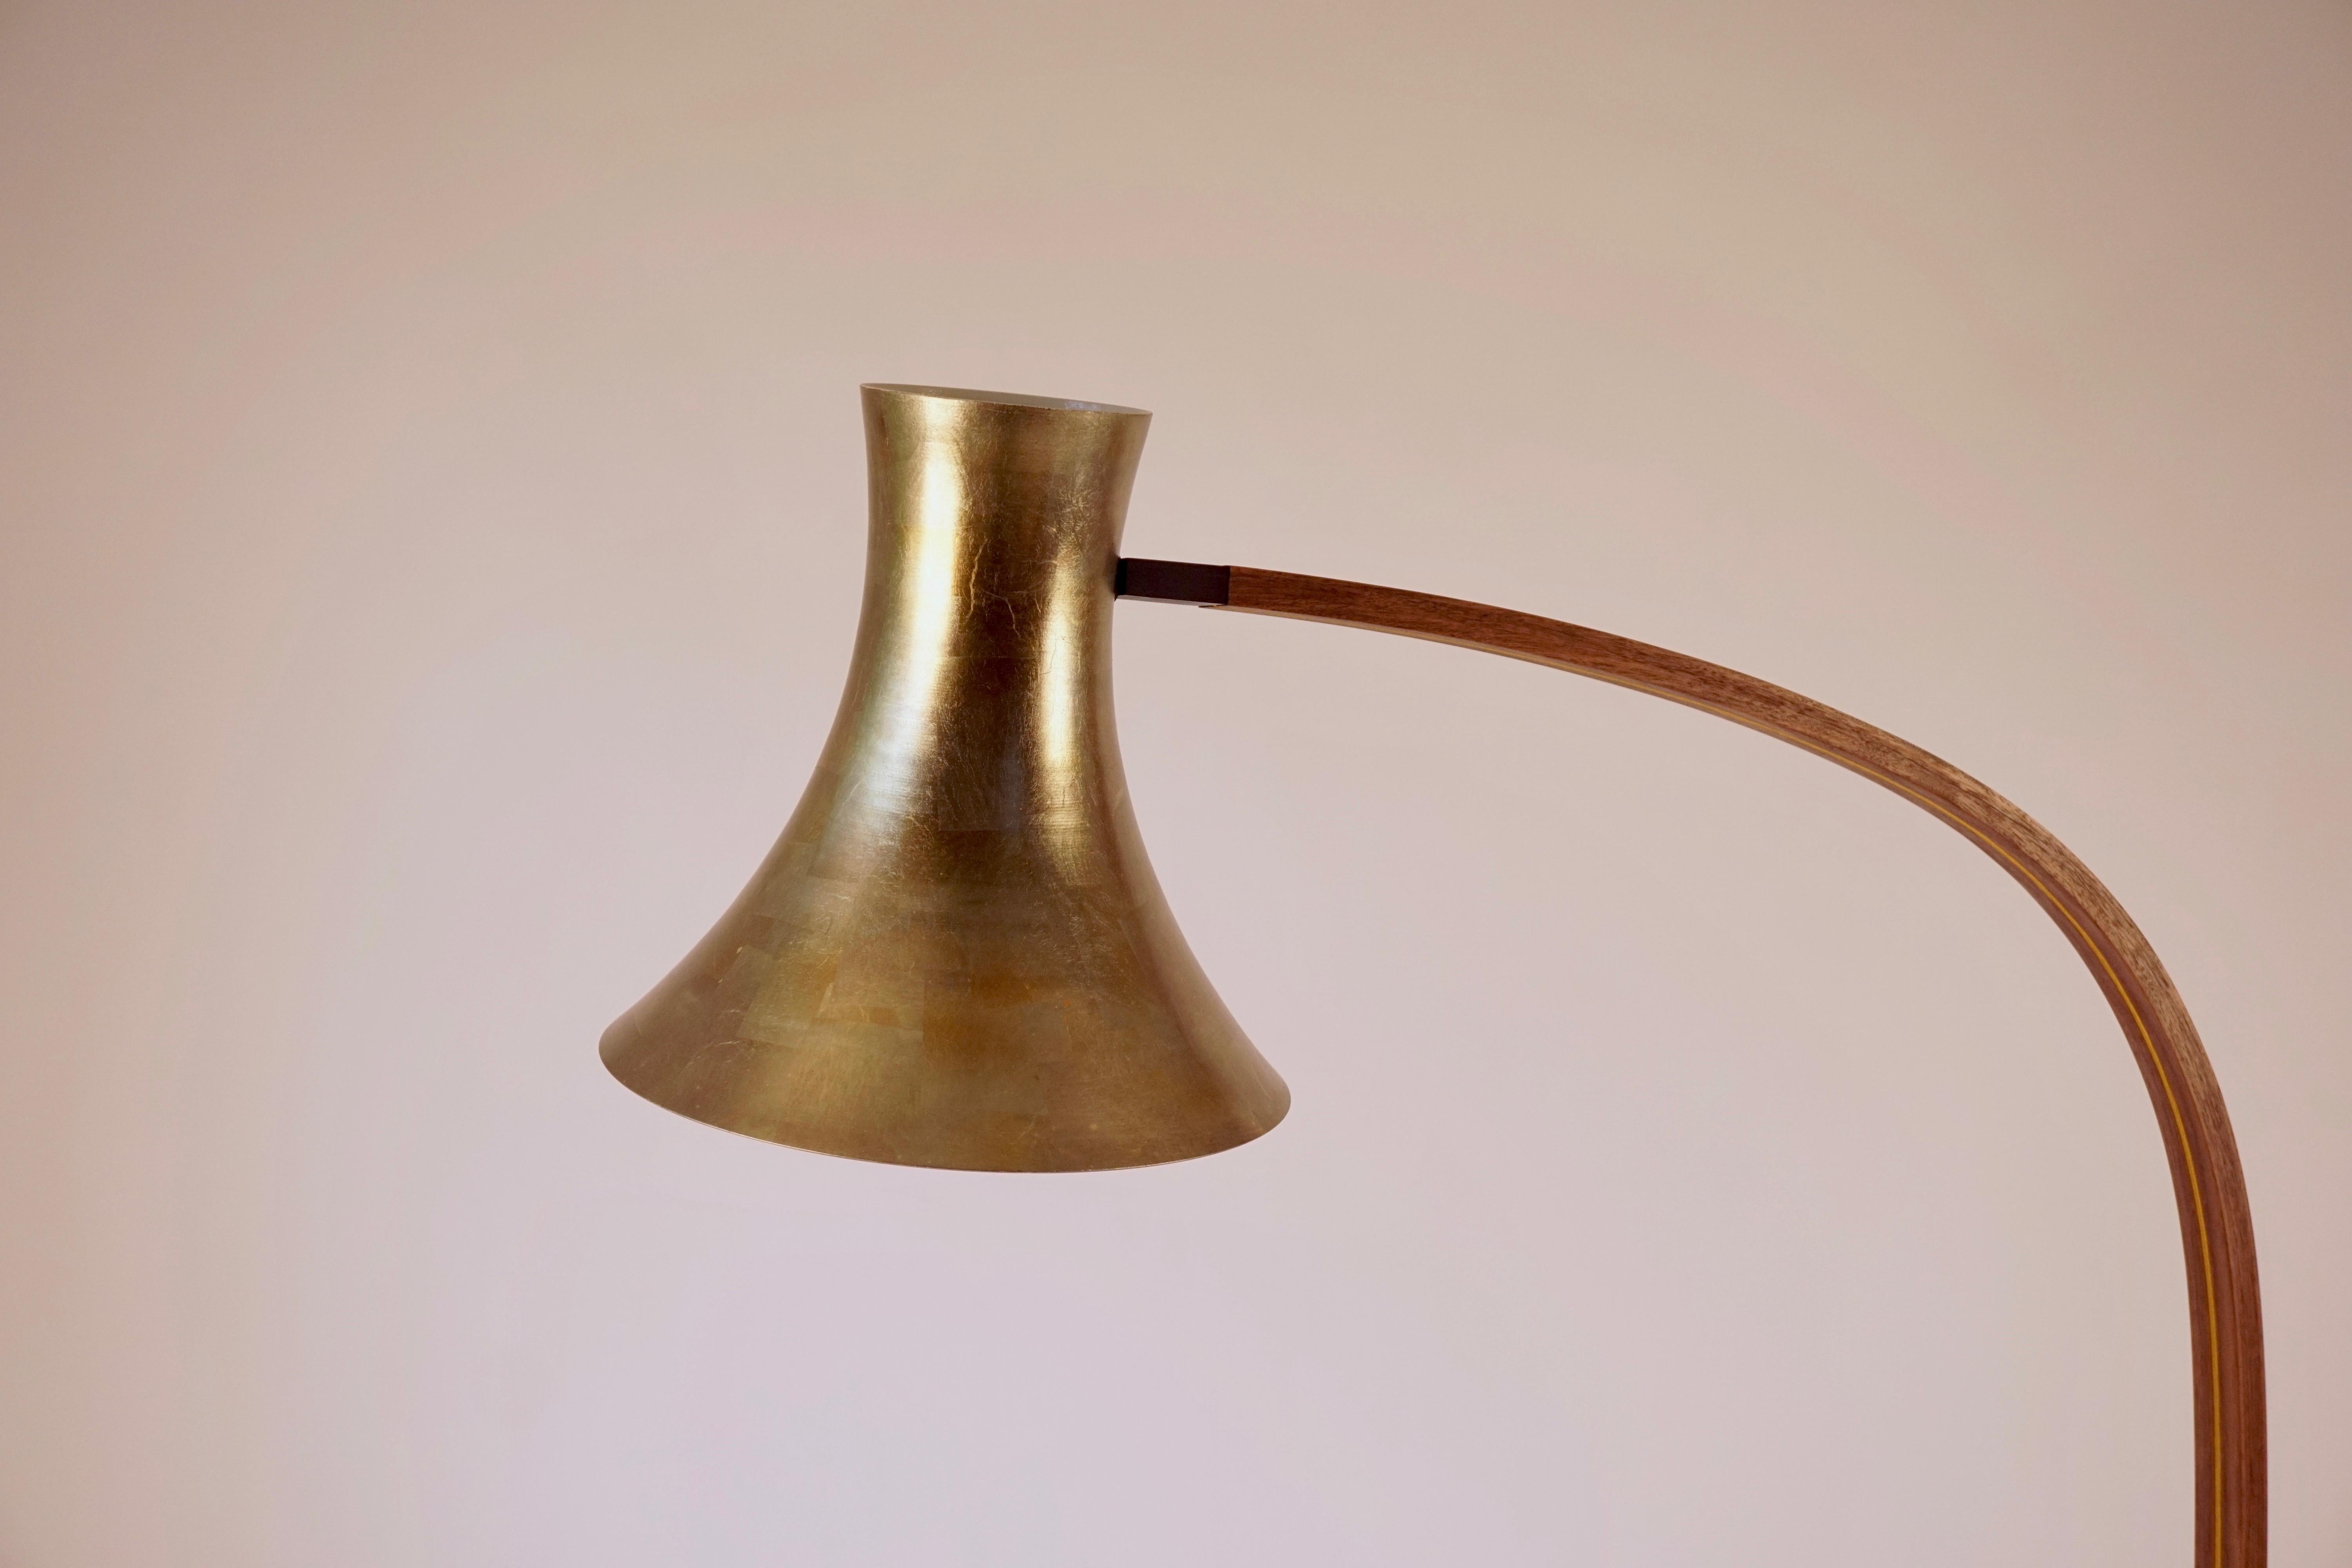 The spun floor lamp features a hand spun aluminum lamp trumpet shaped shade that has been powder coated bone white on the inside. The exterior of the shade has been gilded with a bronze colored leaf. The lamp base and the arm are both walnut, the